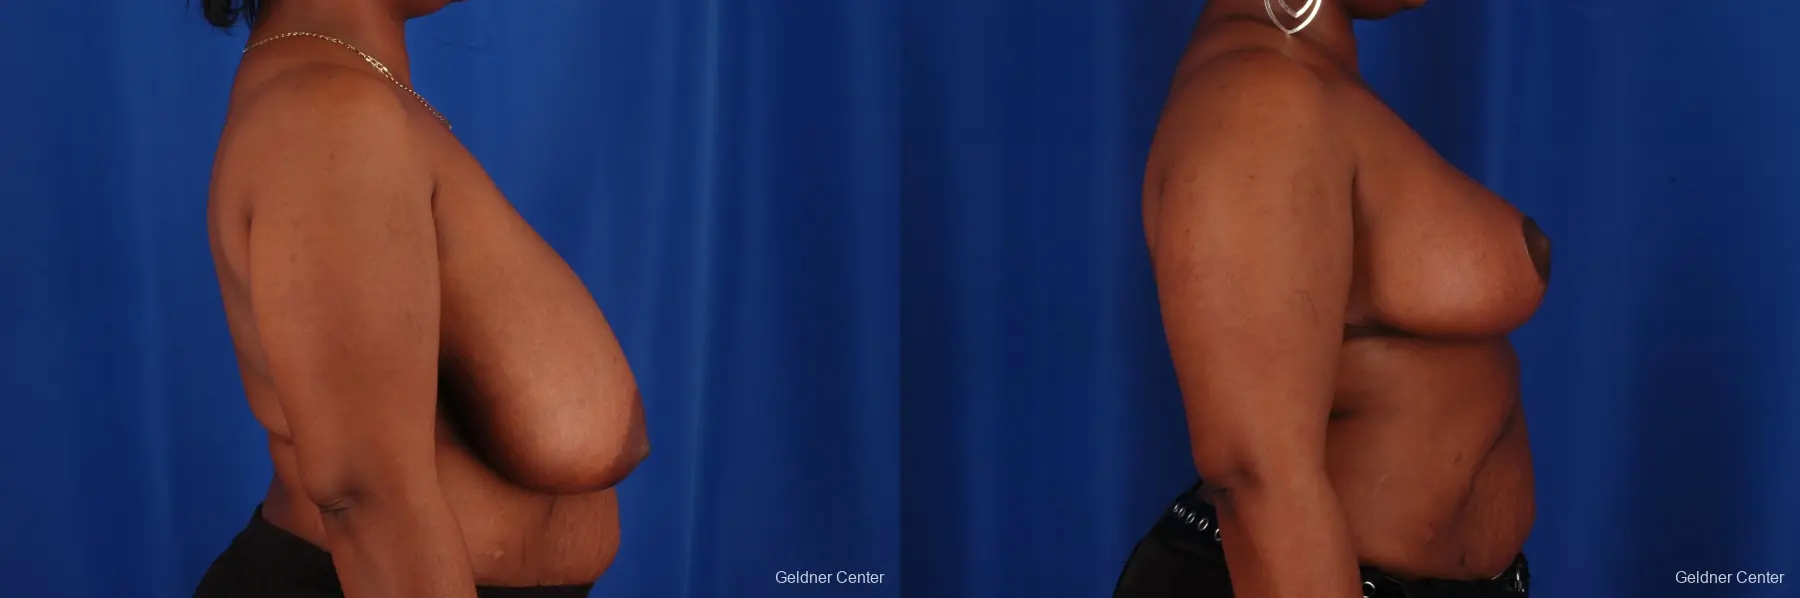 Breast Reduction Hinsdale, Chicago 2334 - Before and After 2